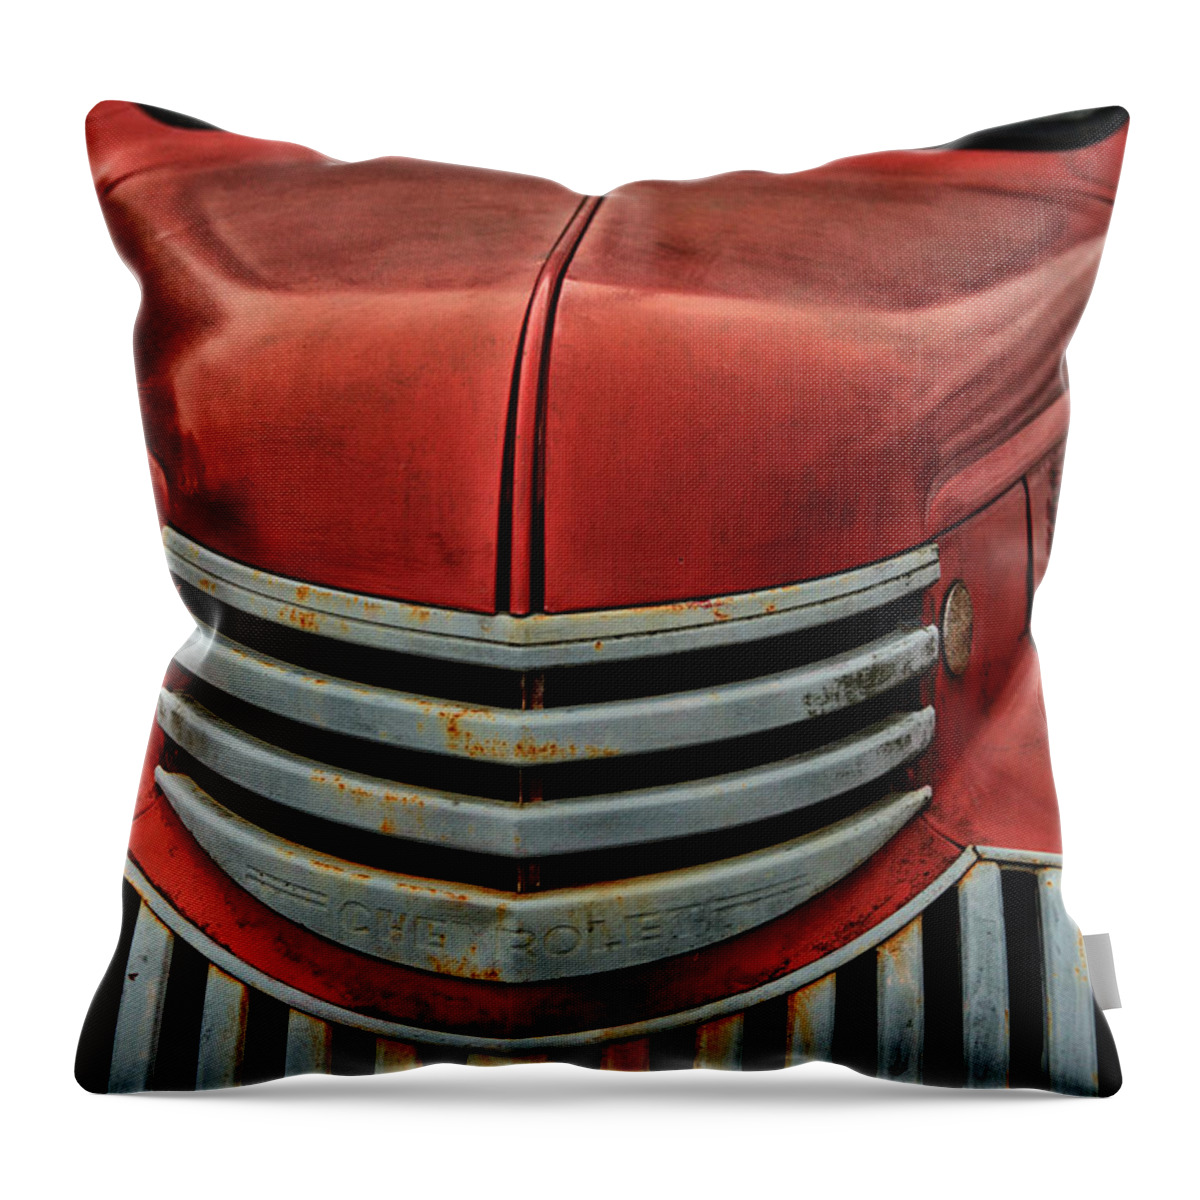 Fire Engine Throw Pillow featuring the photograph Antique Fire Engine by Karol Livote